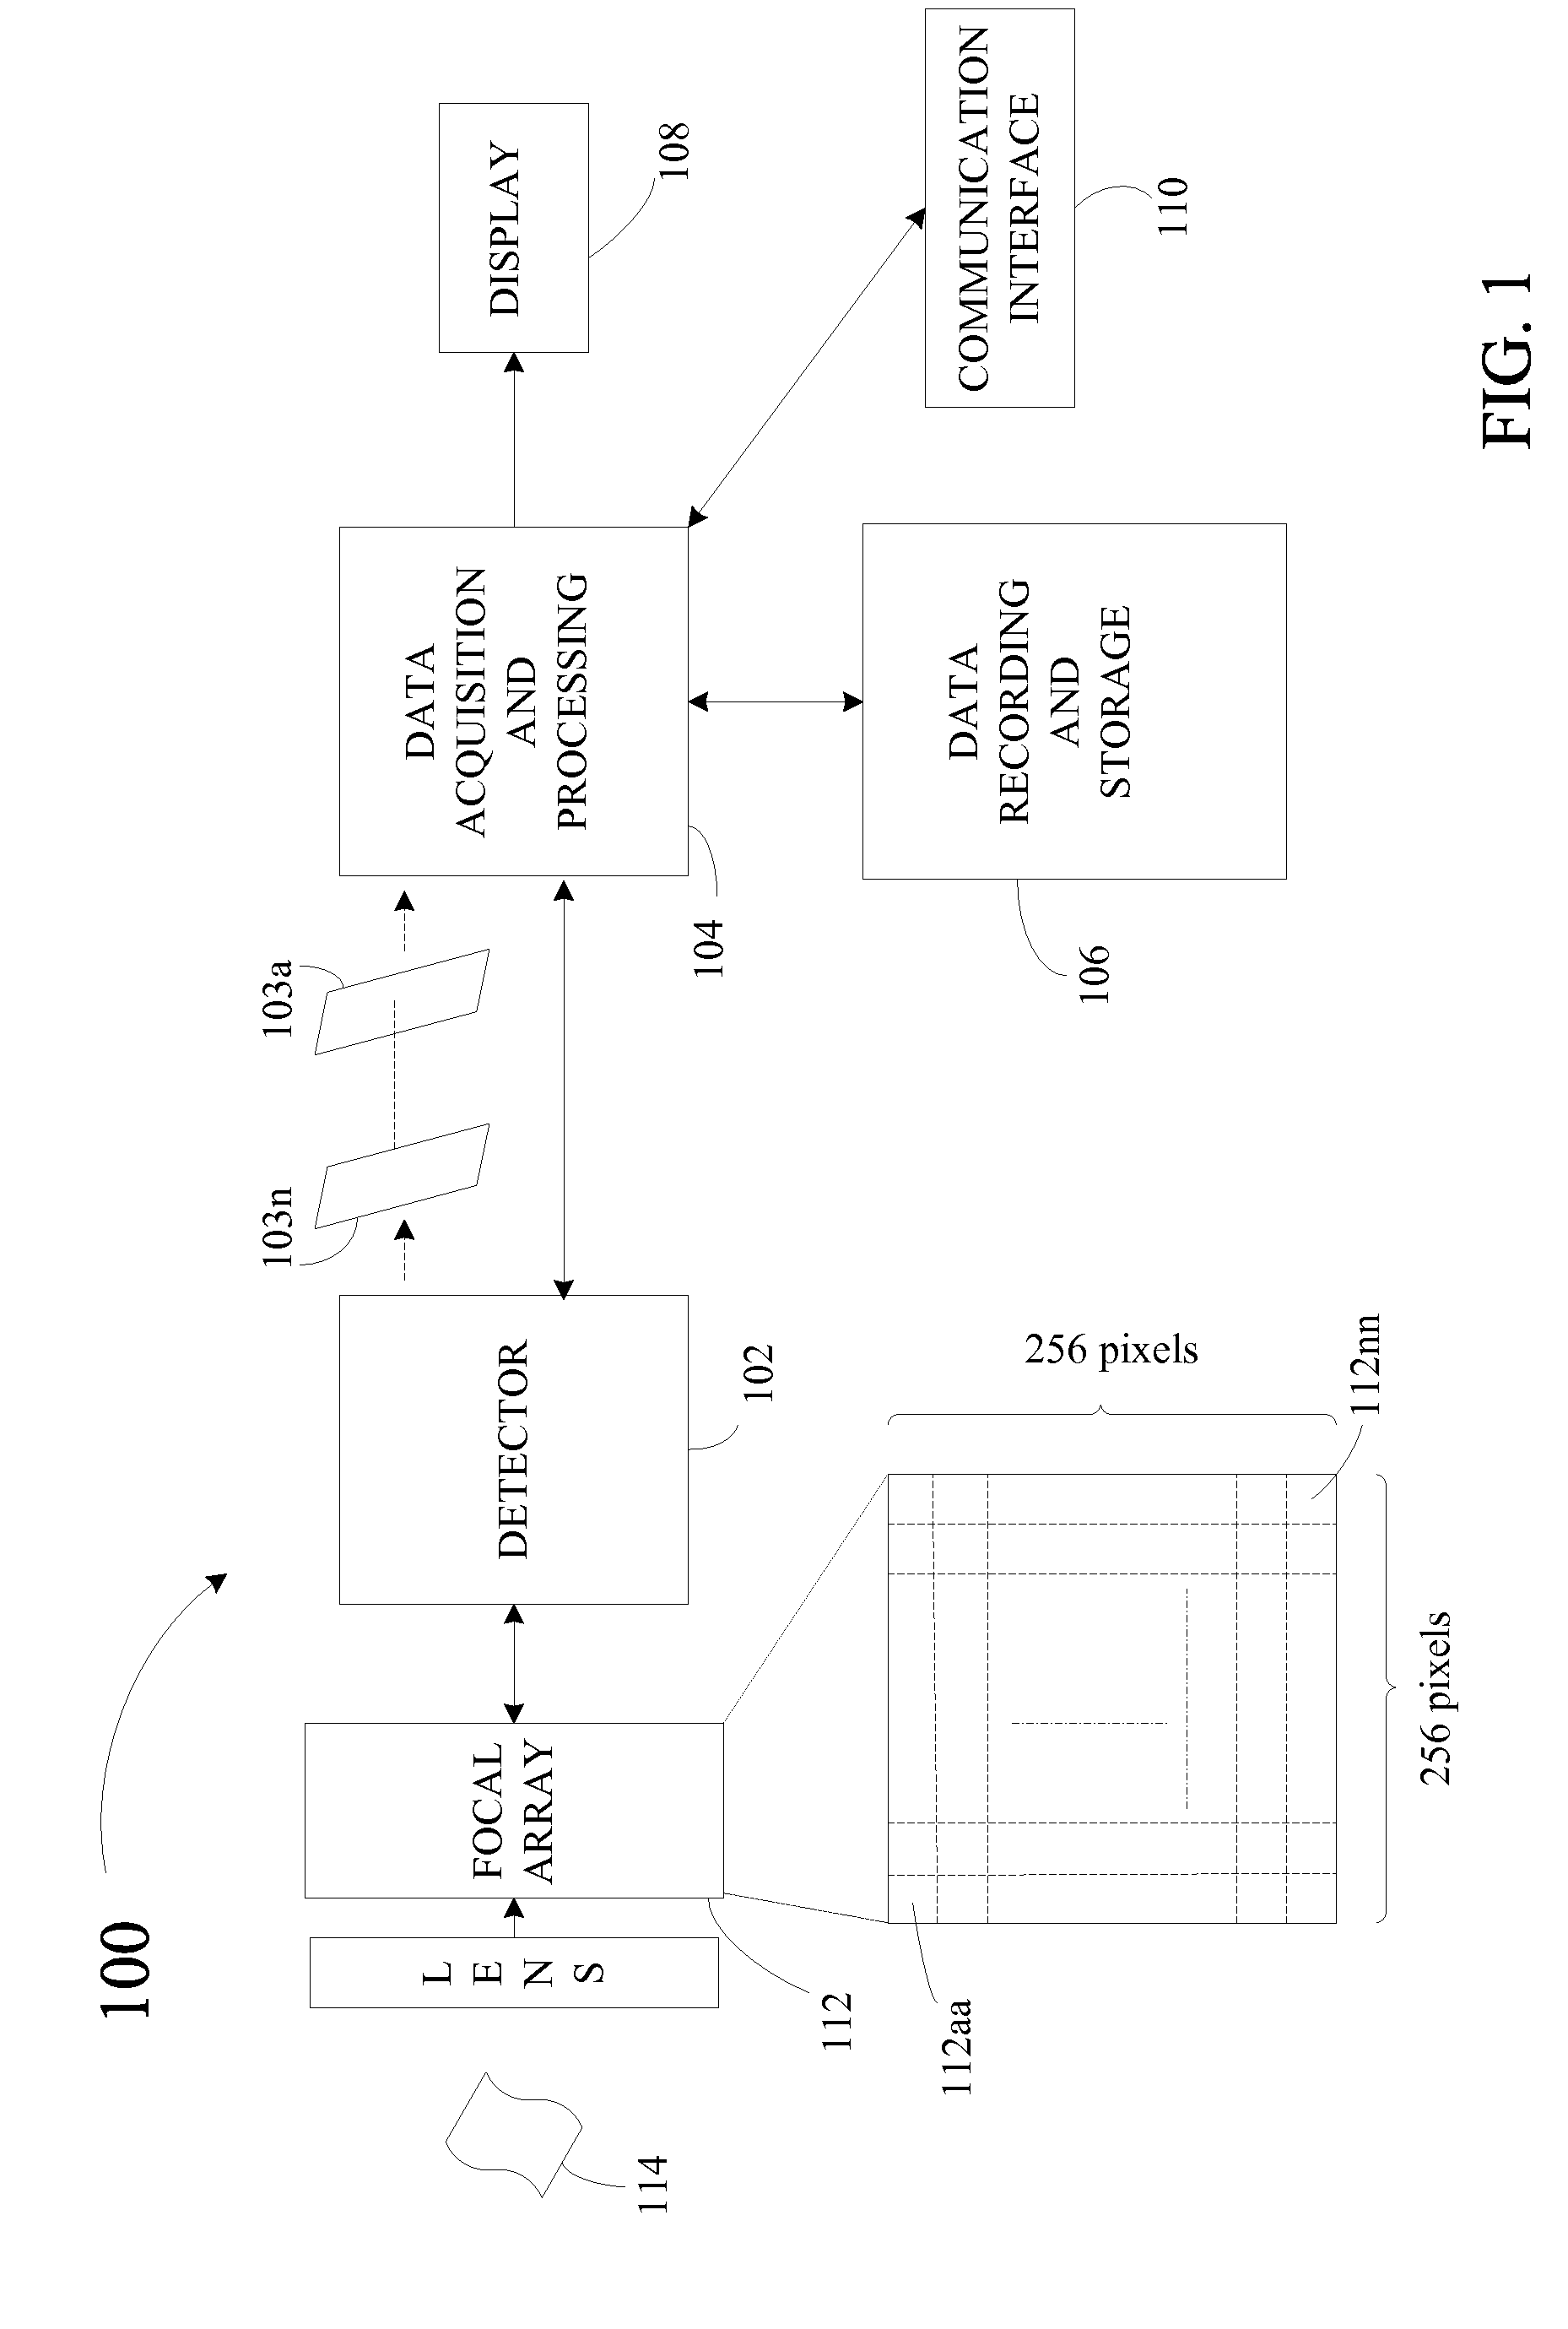 Method and system for enhancing images using multi-resolution histogram shaping